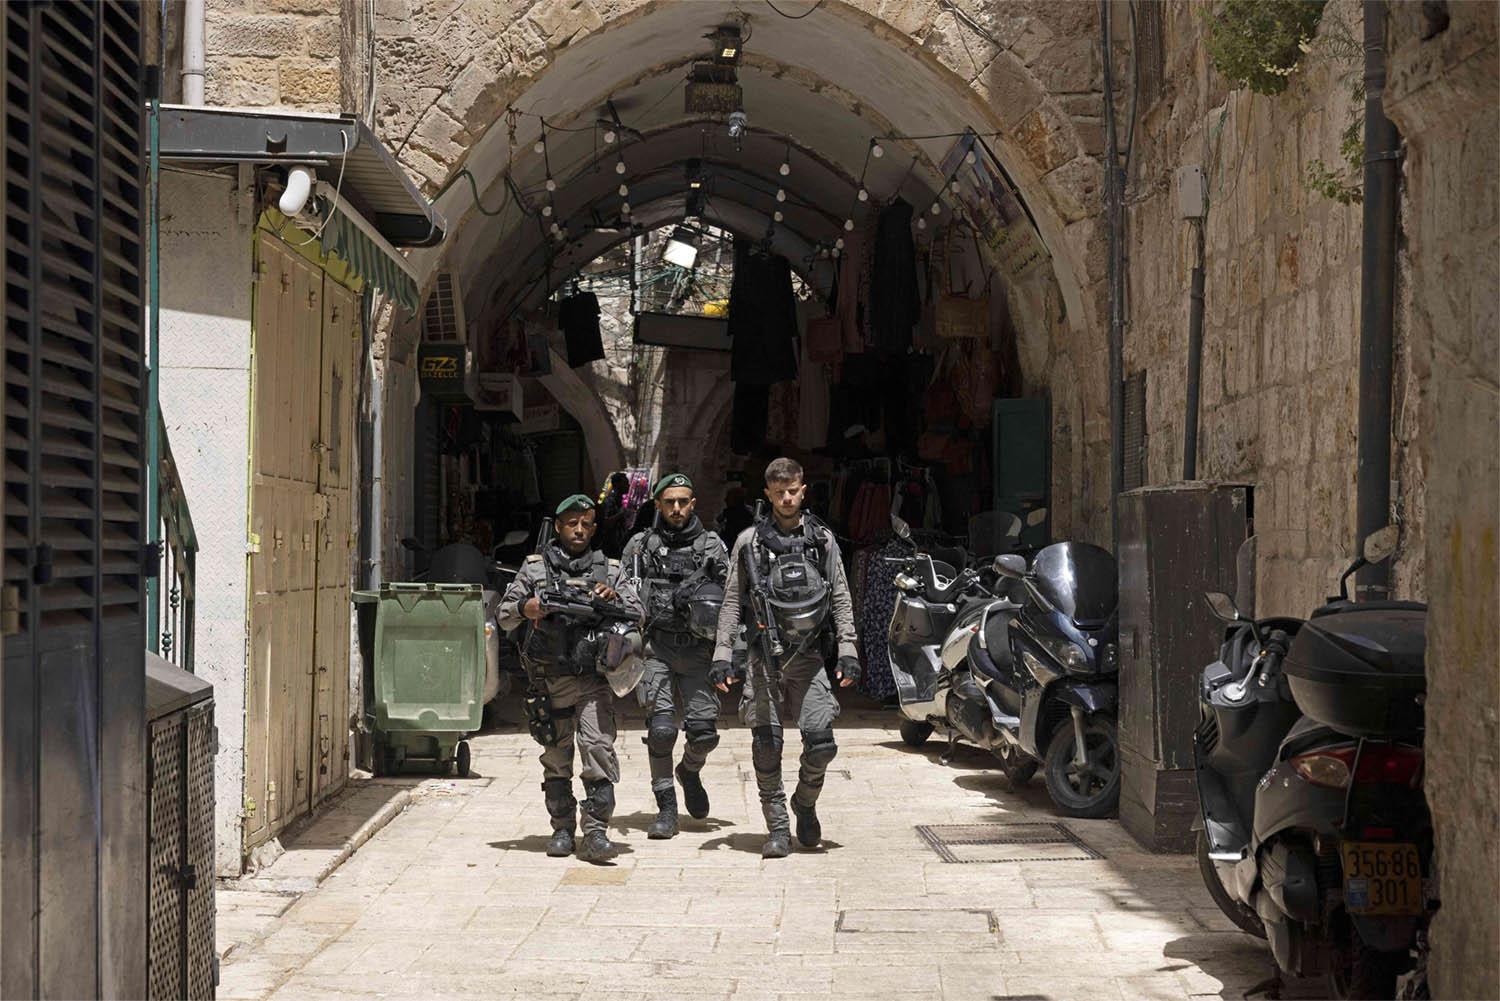 A large number of Israeli officers are deployed around Jerusalem's historic Old City